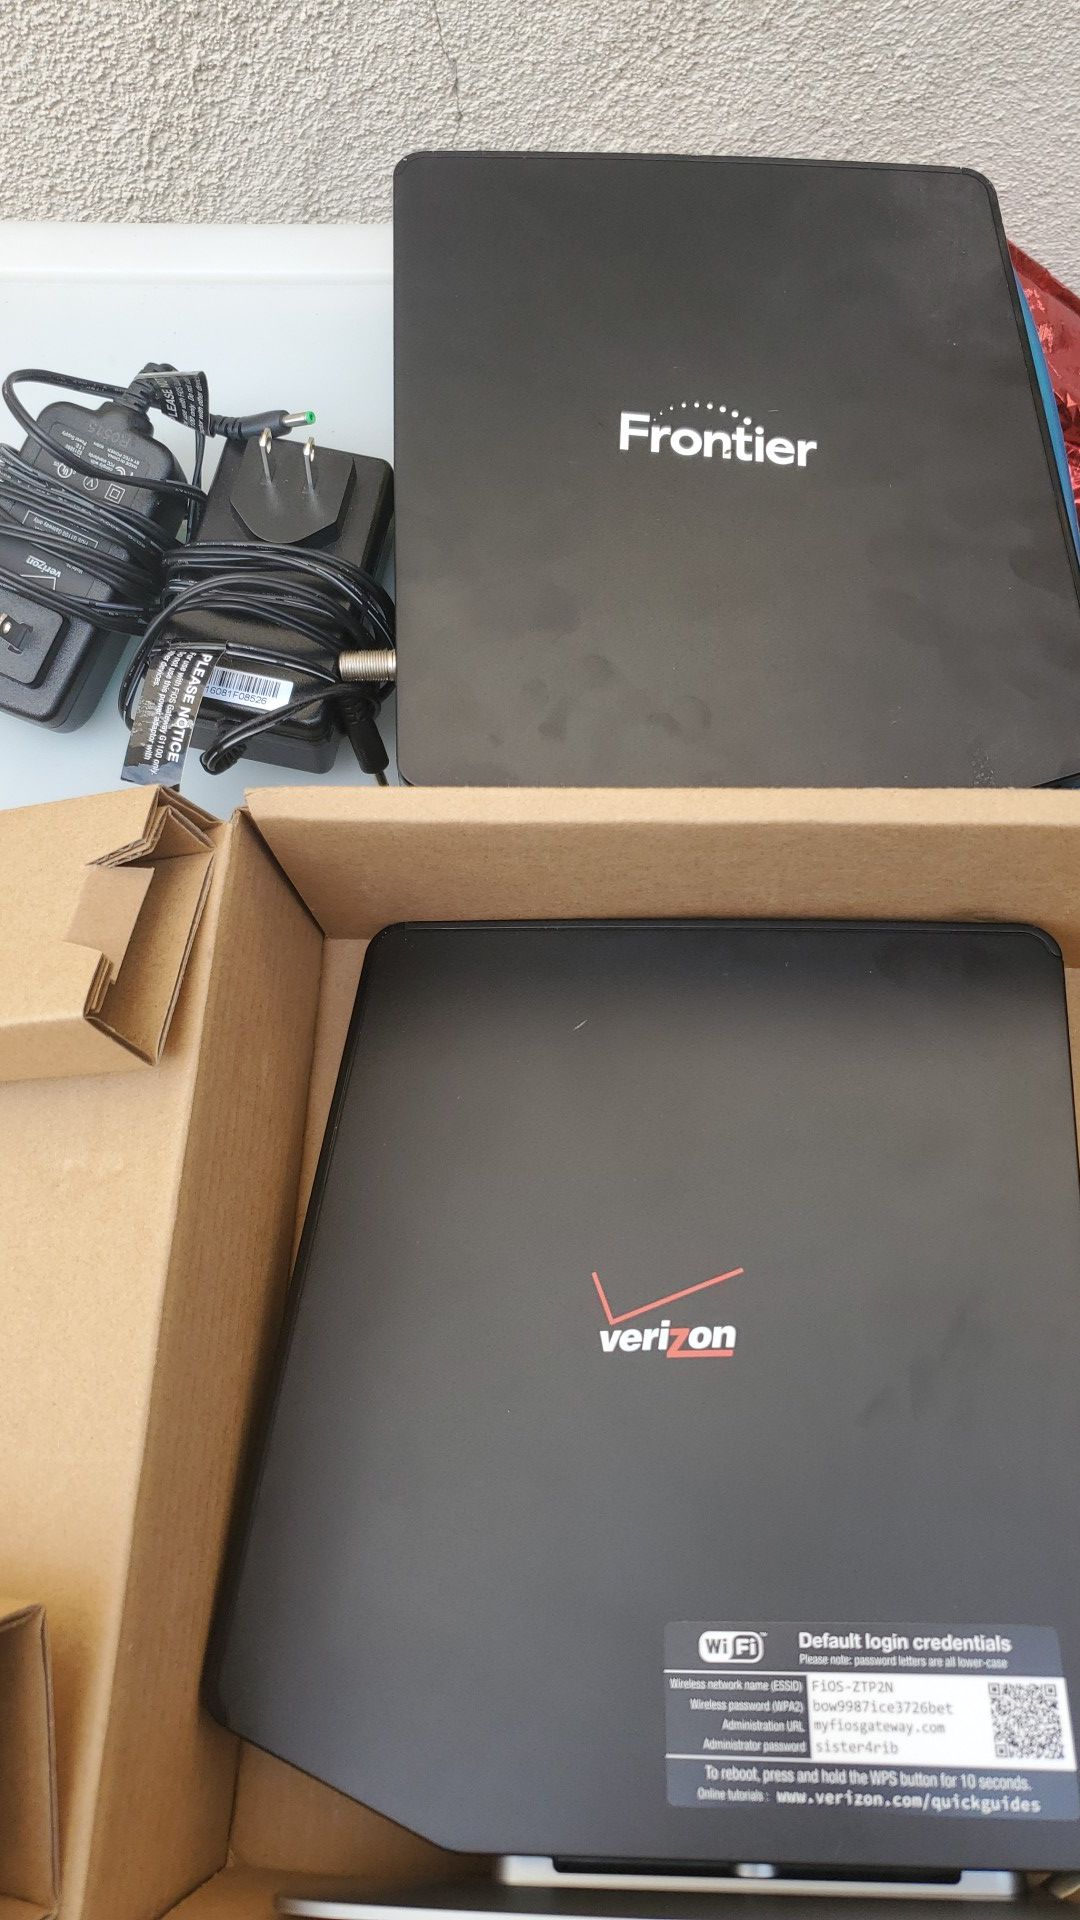 Frontier/ Verizon modem and router